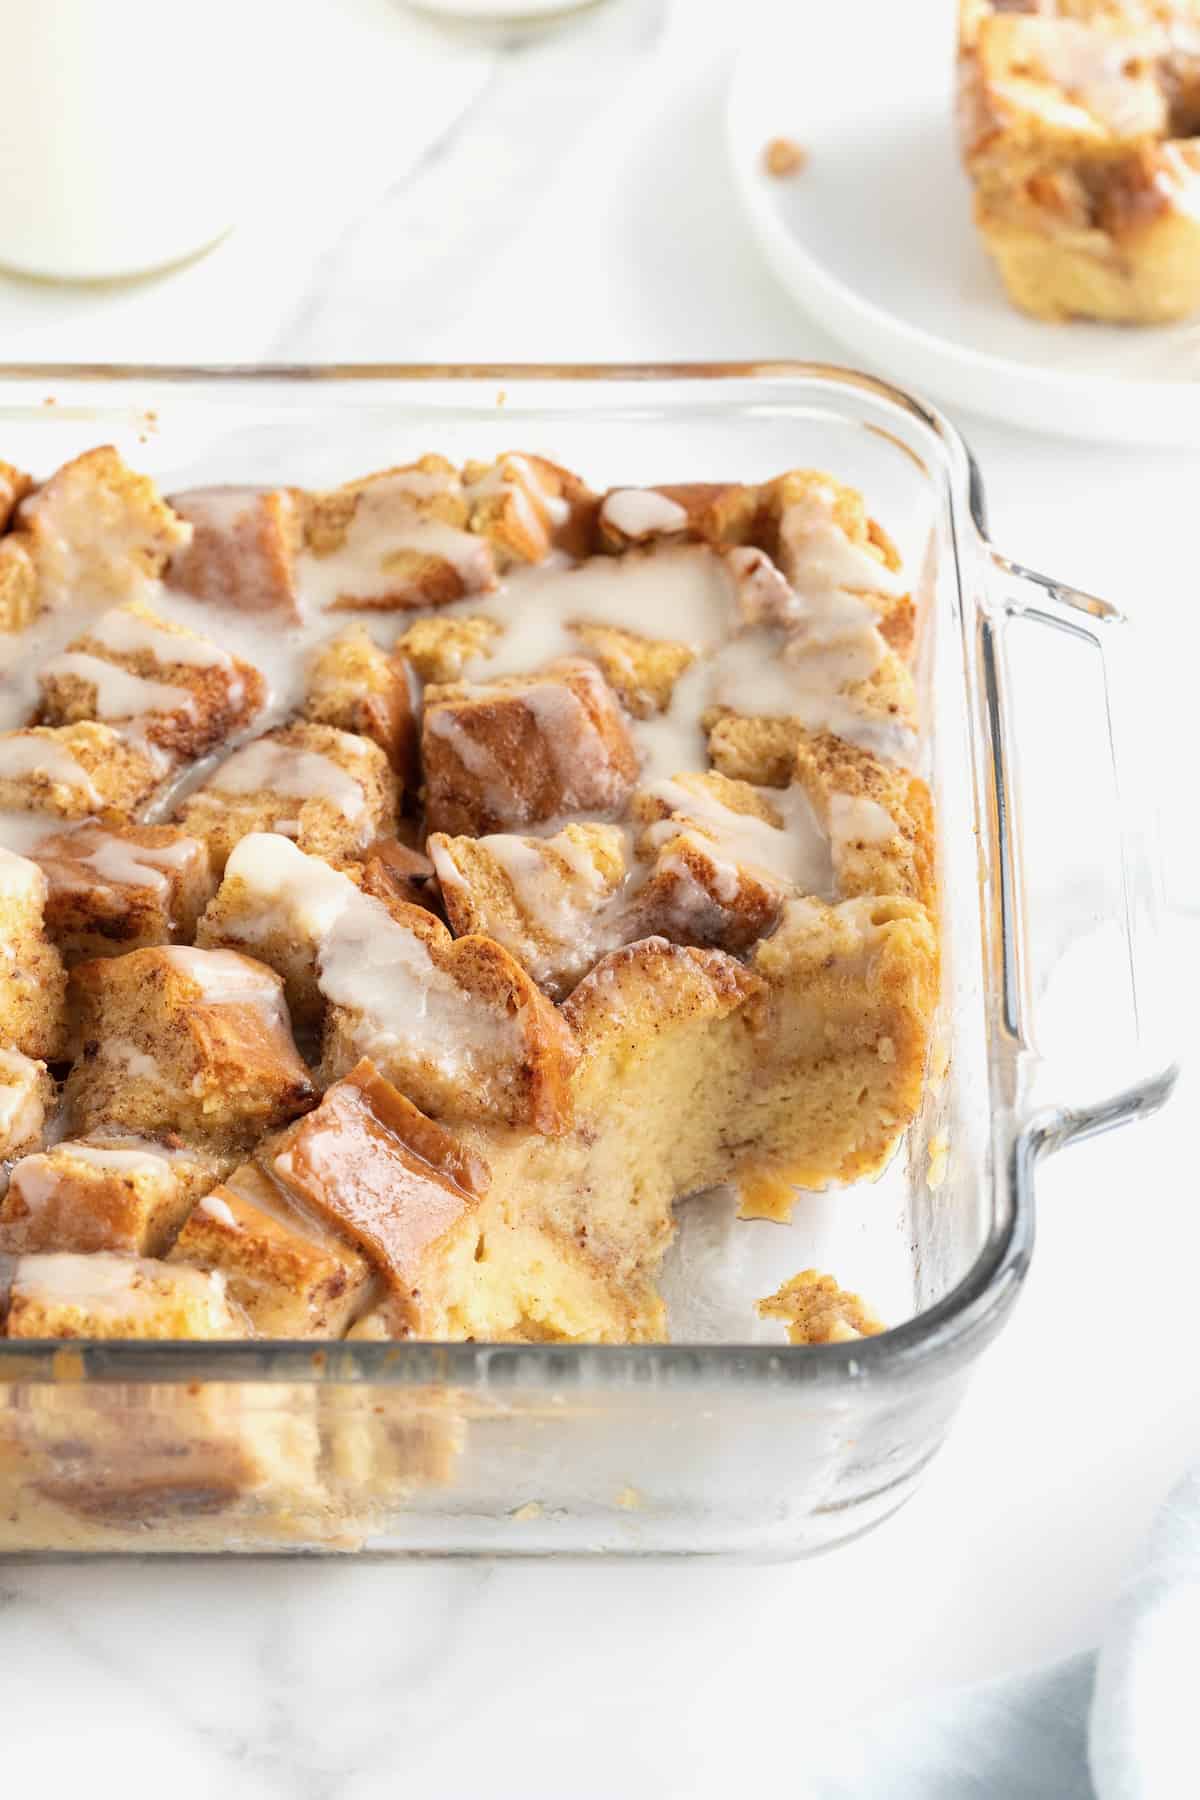 A square glass baking dish of bread pudding with white icing drizzled on top. The bottom right hand corner of the dish has the bread pudding scooped out.